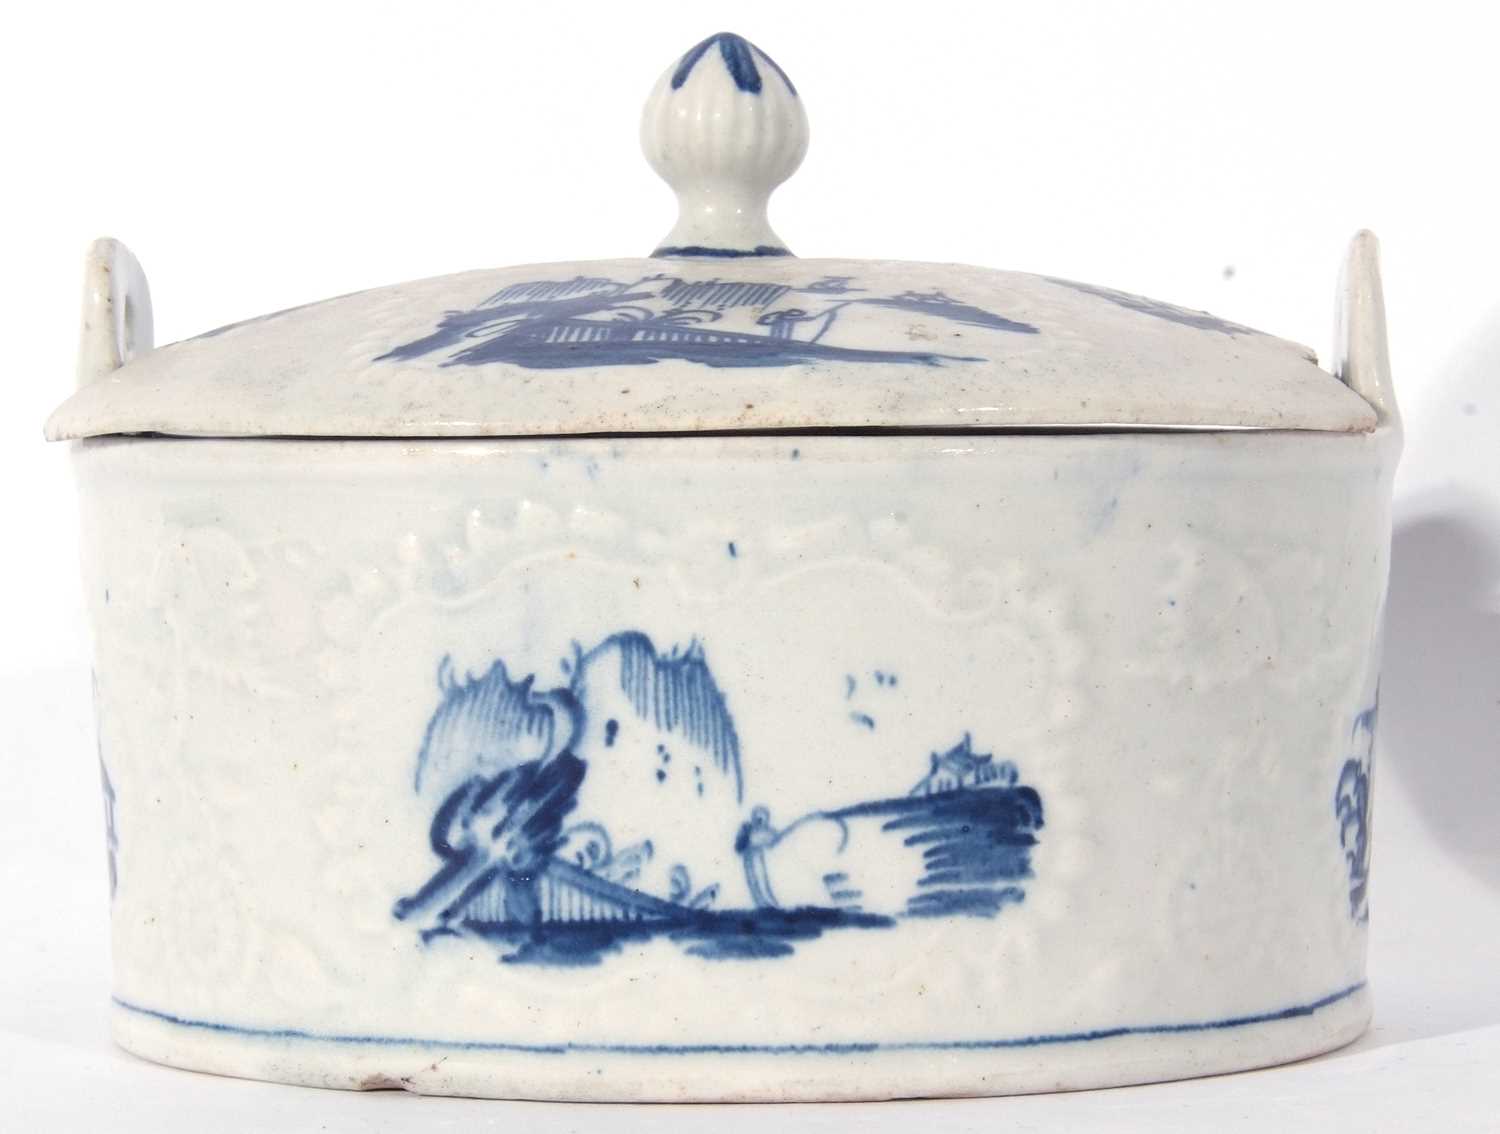 Lowestoft porcelain butter tub, cover and stand circa 1765, the tub moulded with flowers enclosing - Image 7 of 14